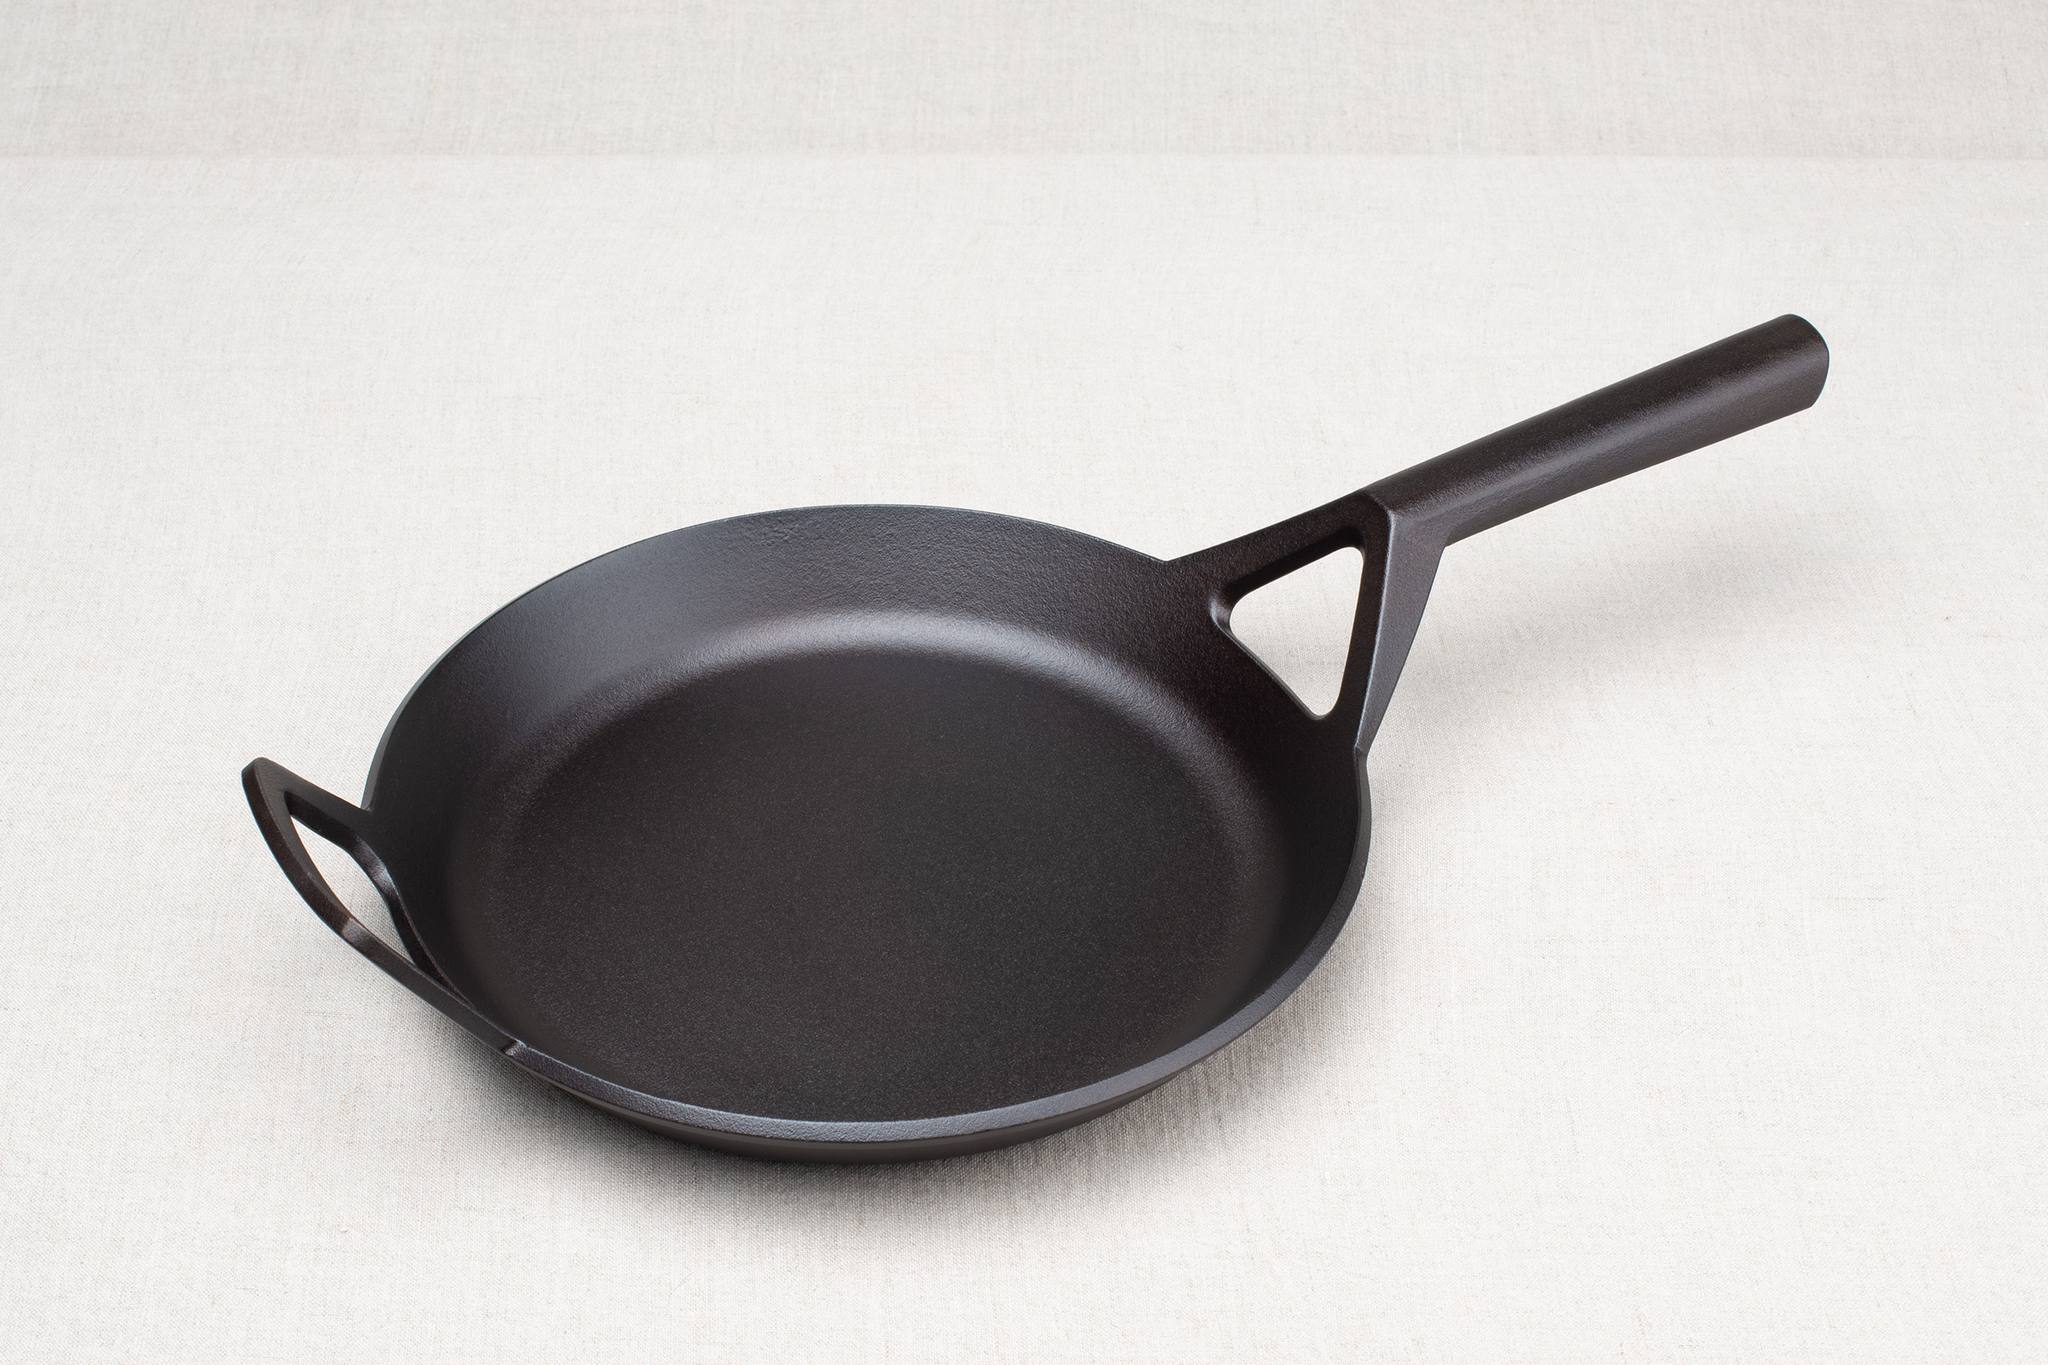 Dash of That Rust-Resistant Square Cast Iron Skillet, 10.5 in - Pick 'n Save